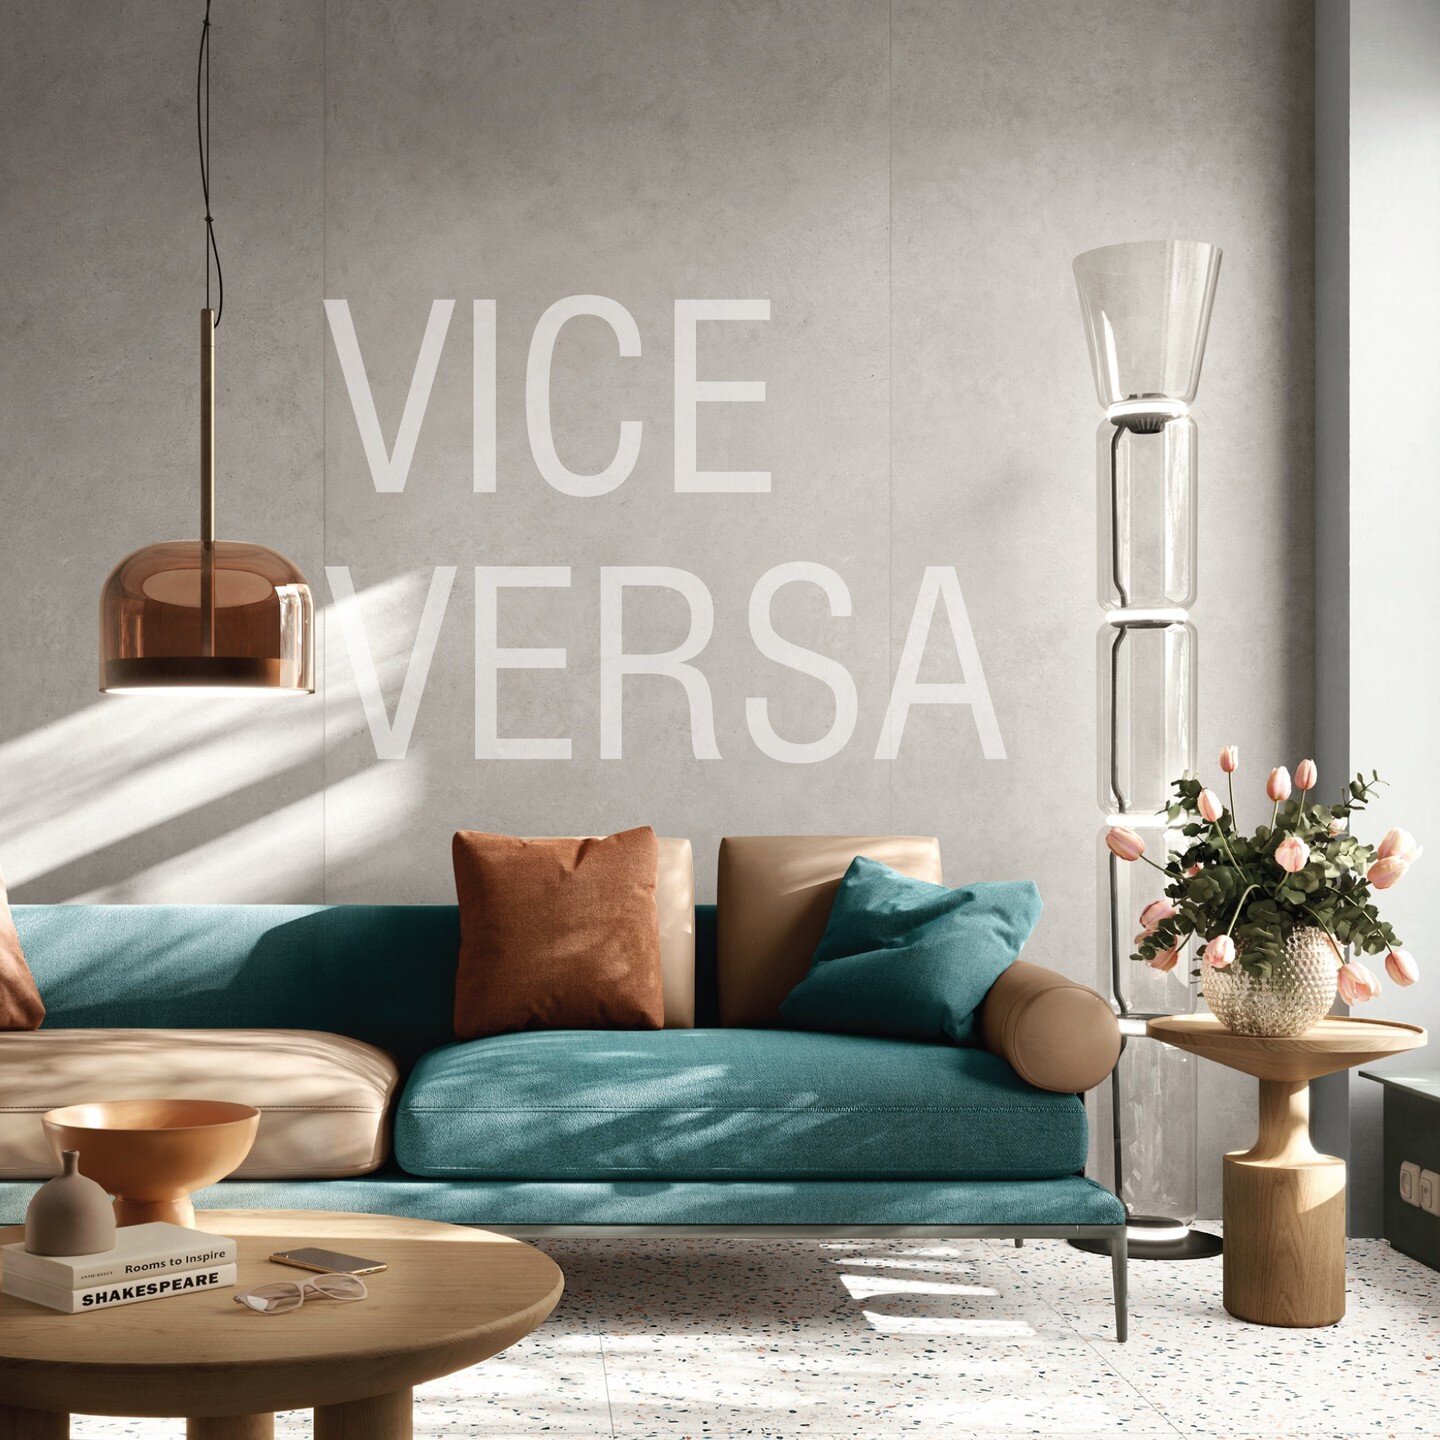 Viceversa porcelain Tile from Italy. The neutral appearance makes this
 collection a creative, versatile, eclectic
 resource for both architecture and
interior design projects. Available in 8 colours and the following sizes:
24&rdquo; x 24&rdquo;
24&